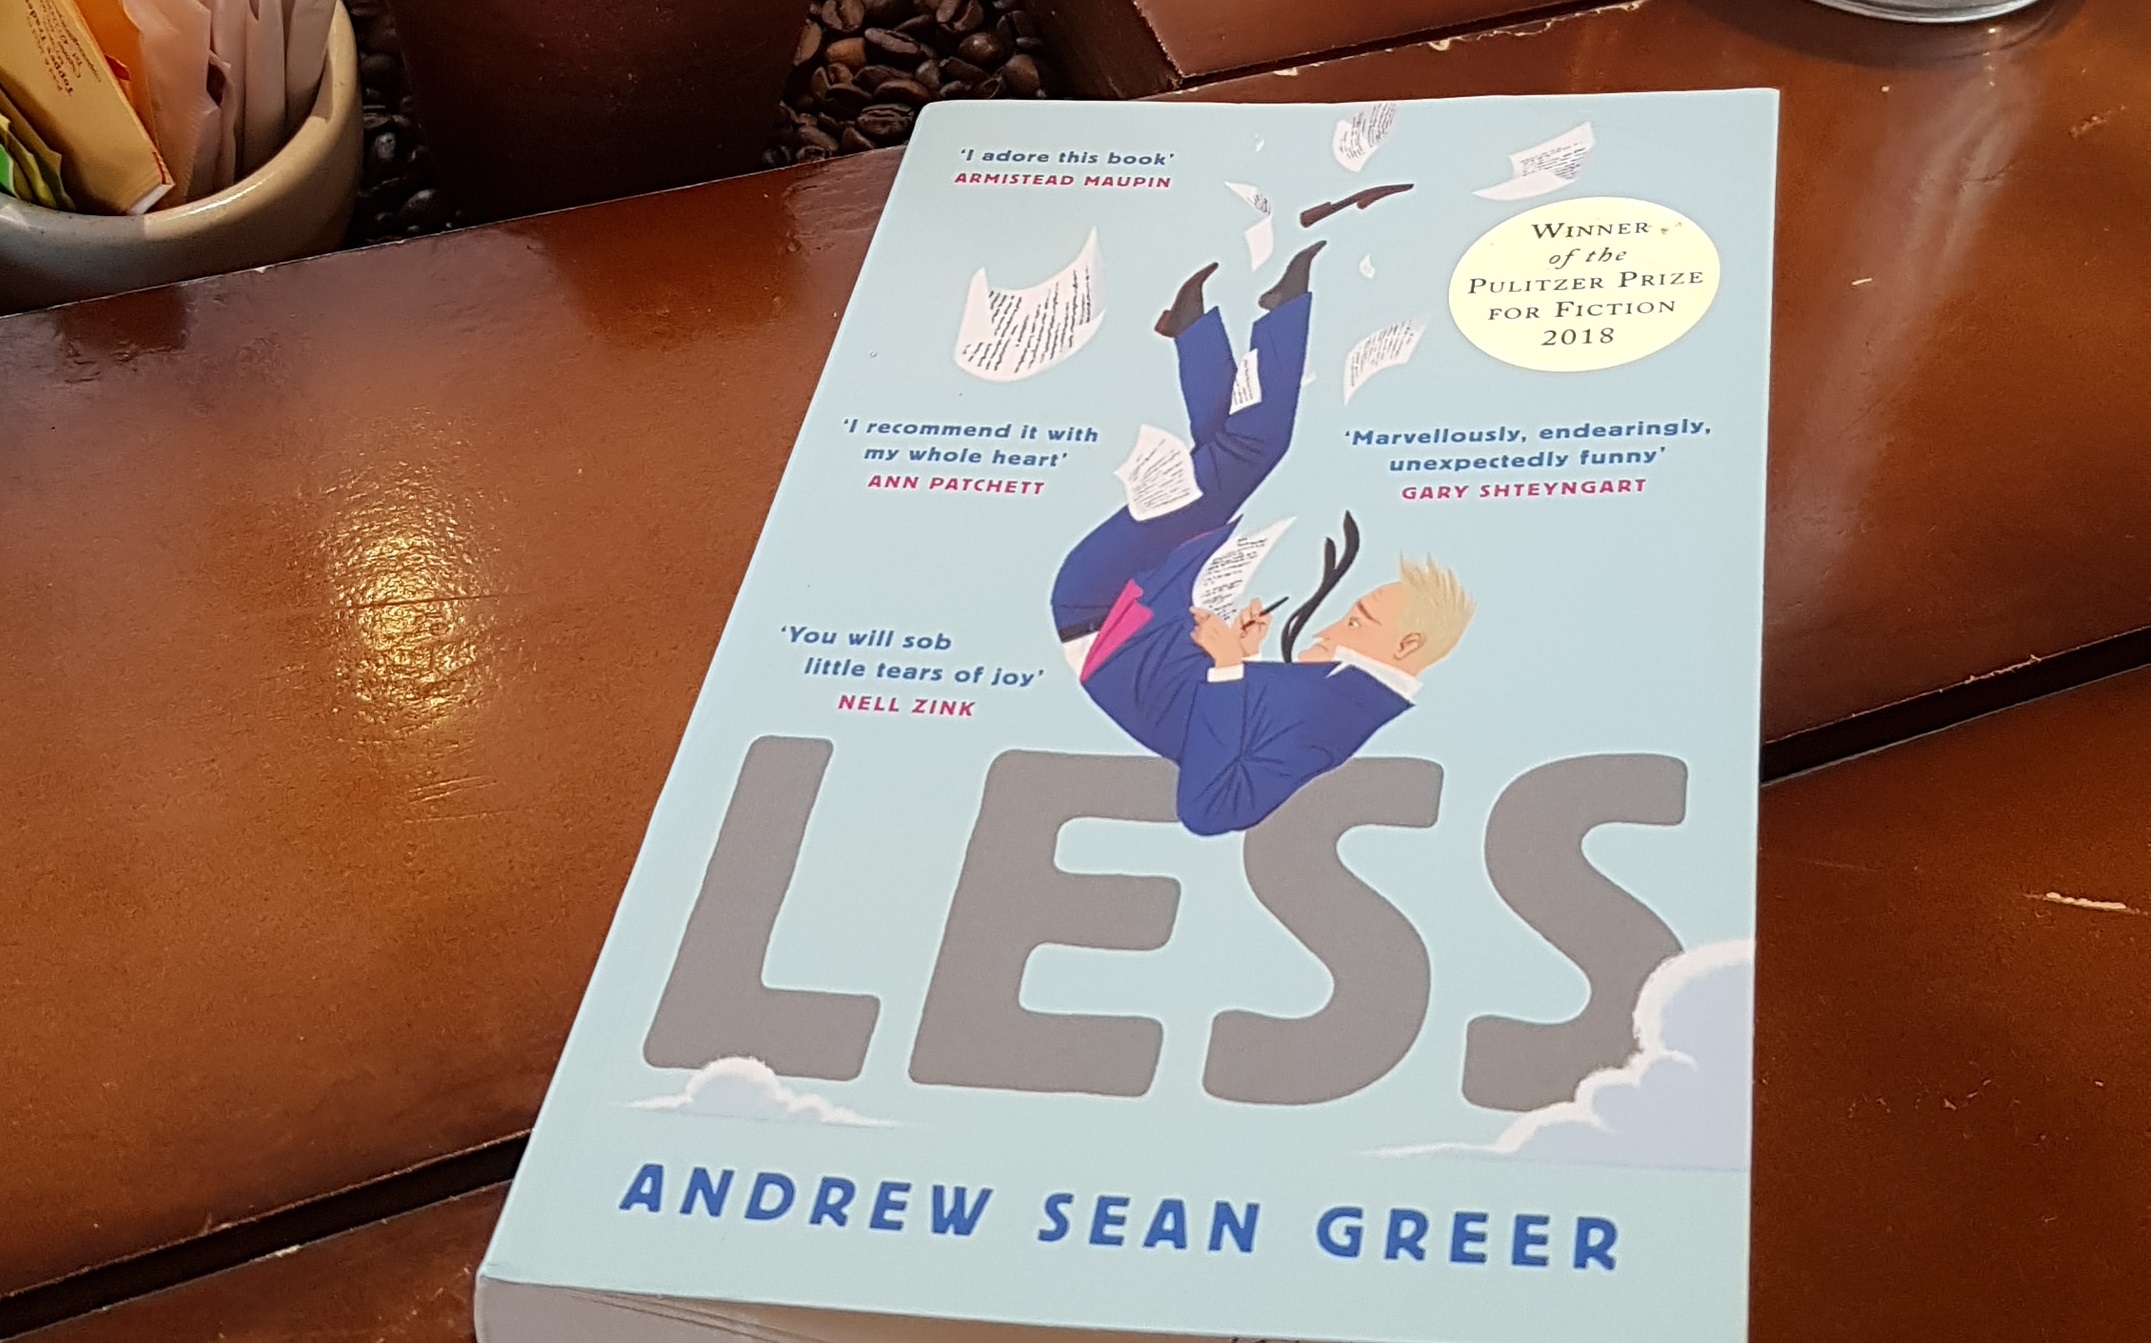 book review of less by greer